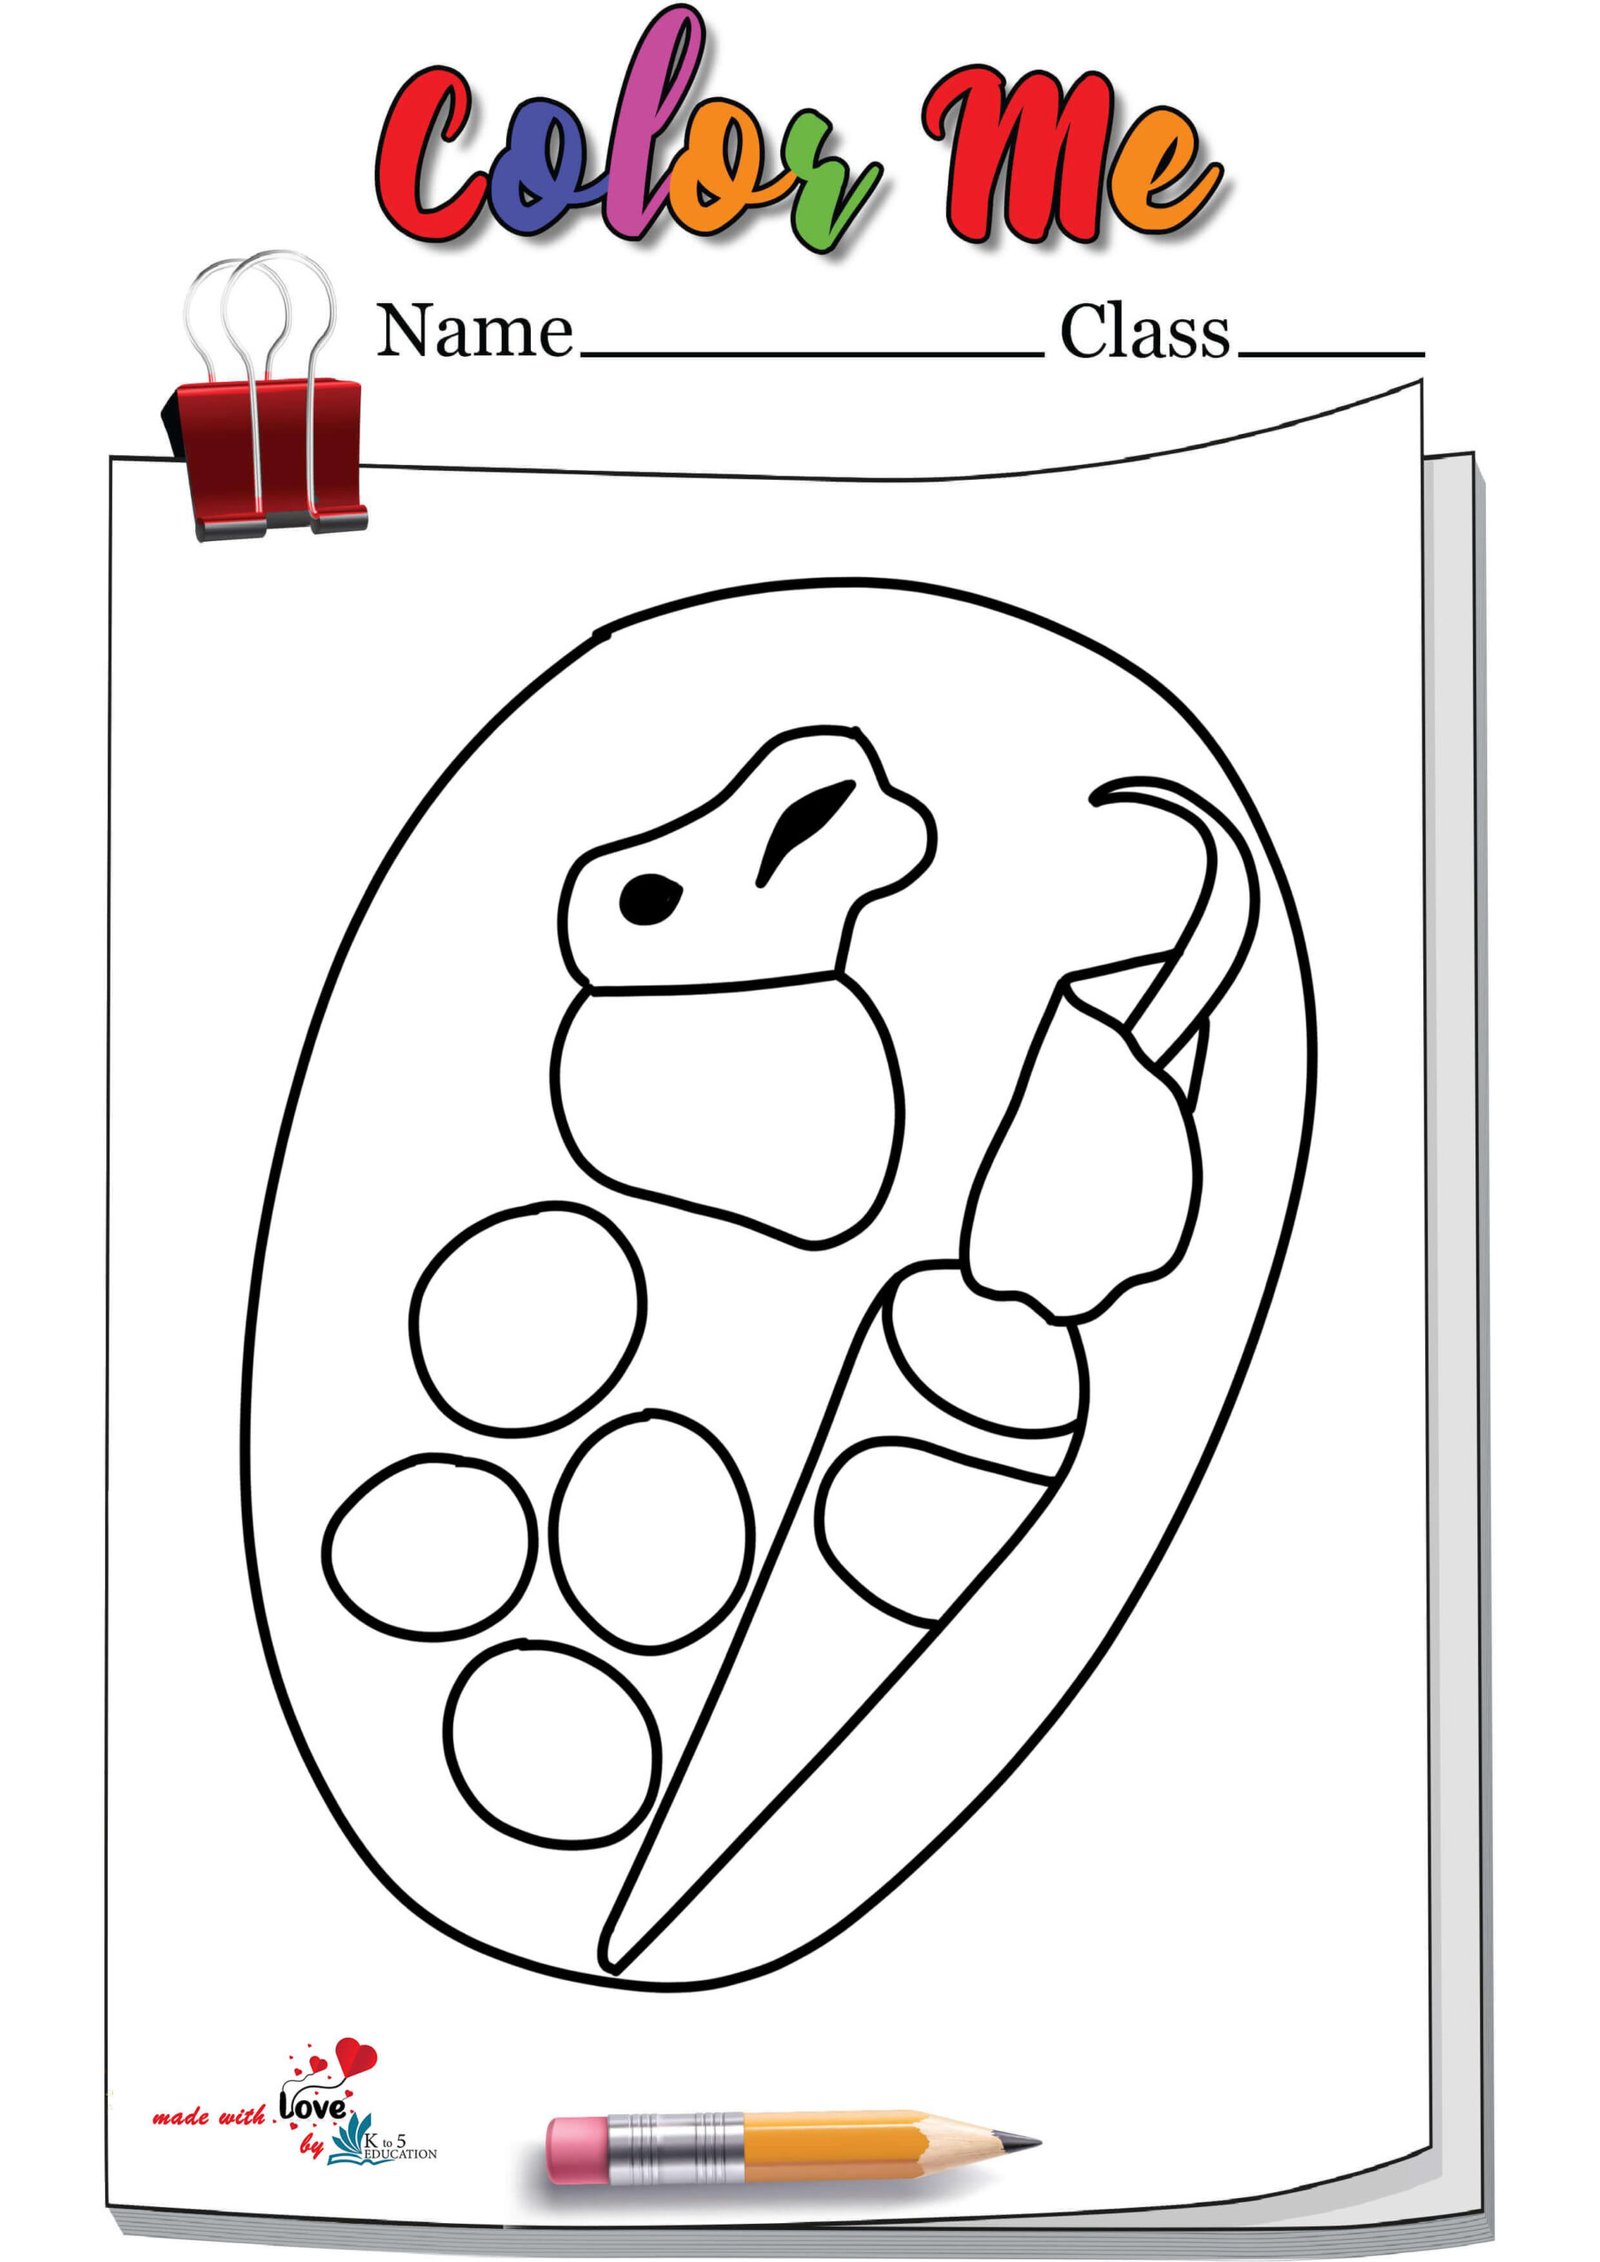 Paper Easter Eggs Coloring Page